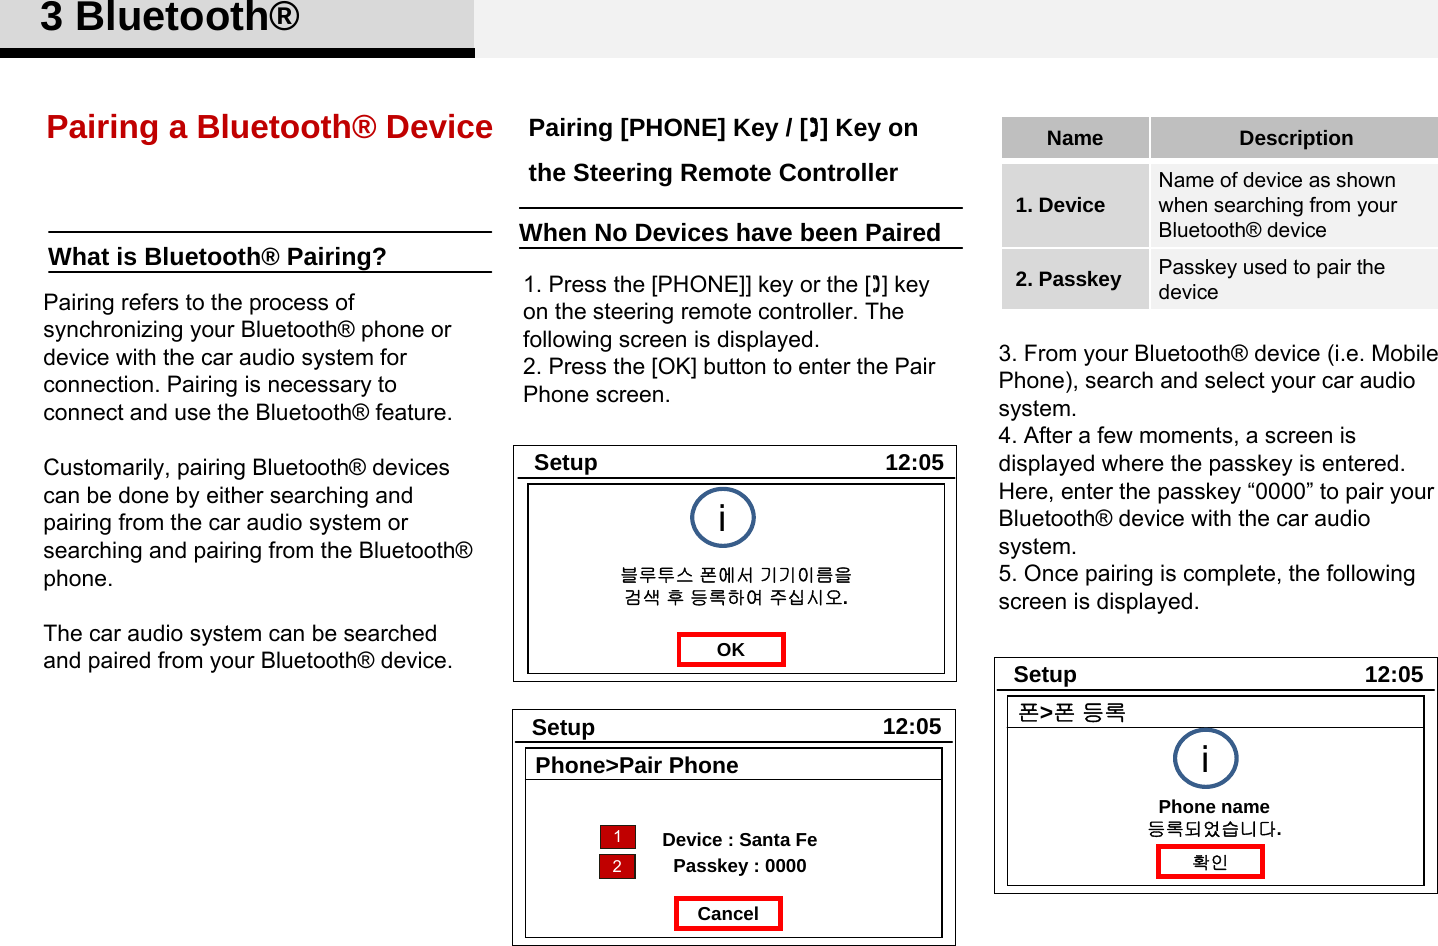 Pairing a Bluetooth® Device1. Press the [PHONE]] key or the [] key on the steering remote controller. The following screen is displayed. 2. Press the [OK] button to enter the Pair Phone screen.12:05Setup트랙 01블루투스 폰에서 기기이름을검색 후 등록하여 주십시오.OK12:05Setup트랙 01Phone&gt;Pair PhoneDevice : Santa FeCancel3. From your Bluetooth® device (i.e. Mobile Phone), search and select your car audio system. 4. After a few moments, a screen is displayed where the passkey is entered. Here, enter the passkey “0000” to pair your Bluetooth® device with the car audio system. 5. Once pairing is complete, the following screen is displayed. 3 Bluetooth®12Pairing [PHONE] Key / [] Key on the Steering Remote ControllerName Description1. Device Name of device as shown when searching from your Bluetooth® device2. Passkey Passkey used to pair the devicePairing refers to the process of synchronizing your Bluetooth® phone or device with the car audio system for connection. Pairing is necessary to connect and use the Bluetooth® feature.Customarily, pairing Bluetooth® devices can be done by either searching and pairing from the car audio system or searching and pairing from the Bluetooth® phone. The car audio system can be searched and paired from your Bluetooth® device.What is Bluetooth® Pairing? When No Devices have been PairediPasskey : 000012:05Setup트랙 01폰&gt;폰등록확인Phone name등록되었습니다.i